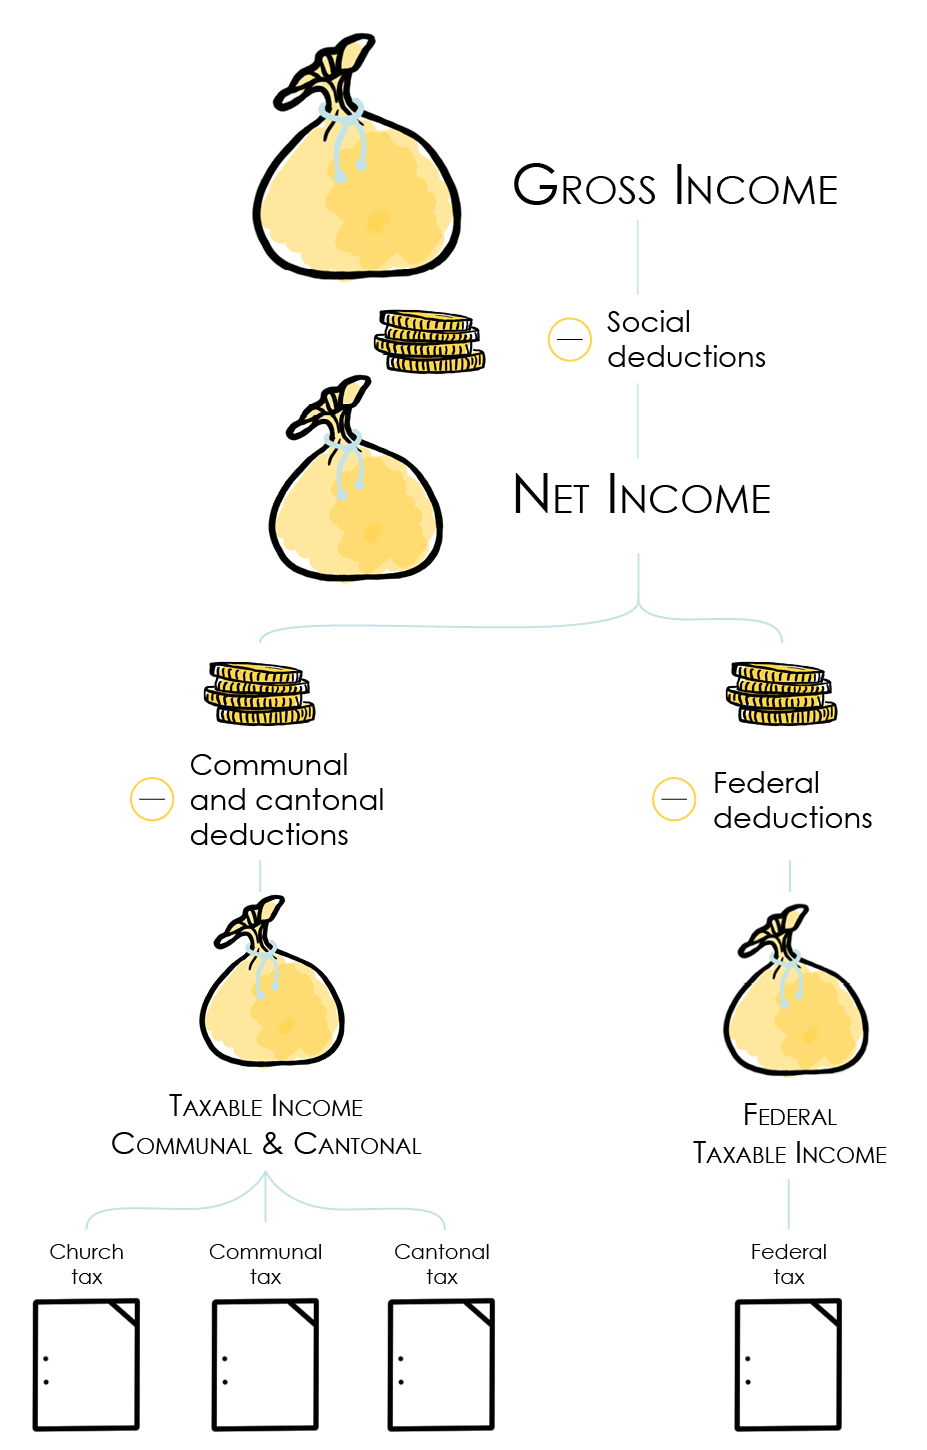 Diagram showing the transition from gross income to the breakdown of the 3 tax levels